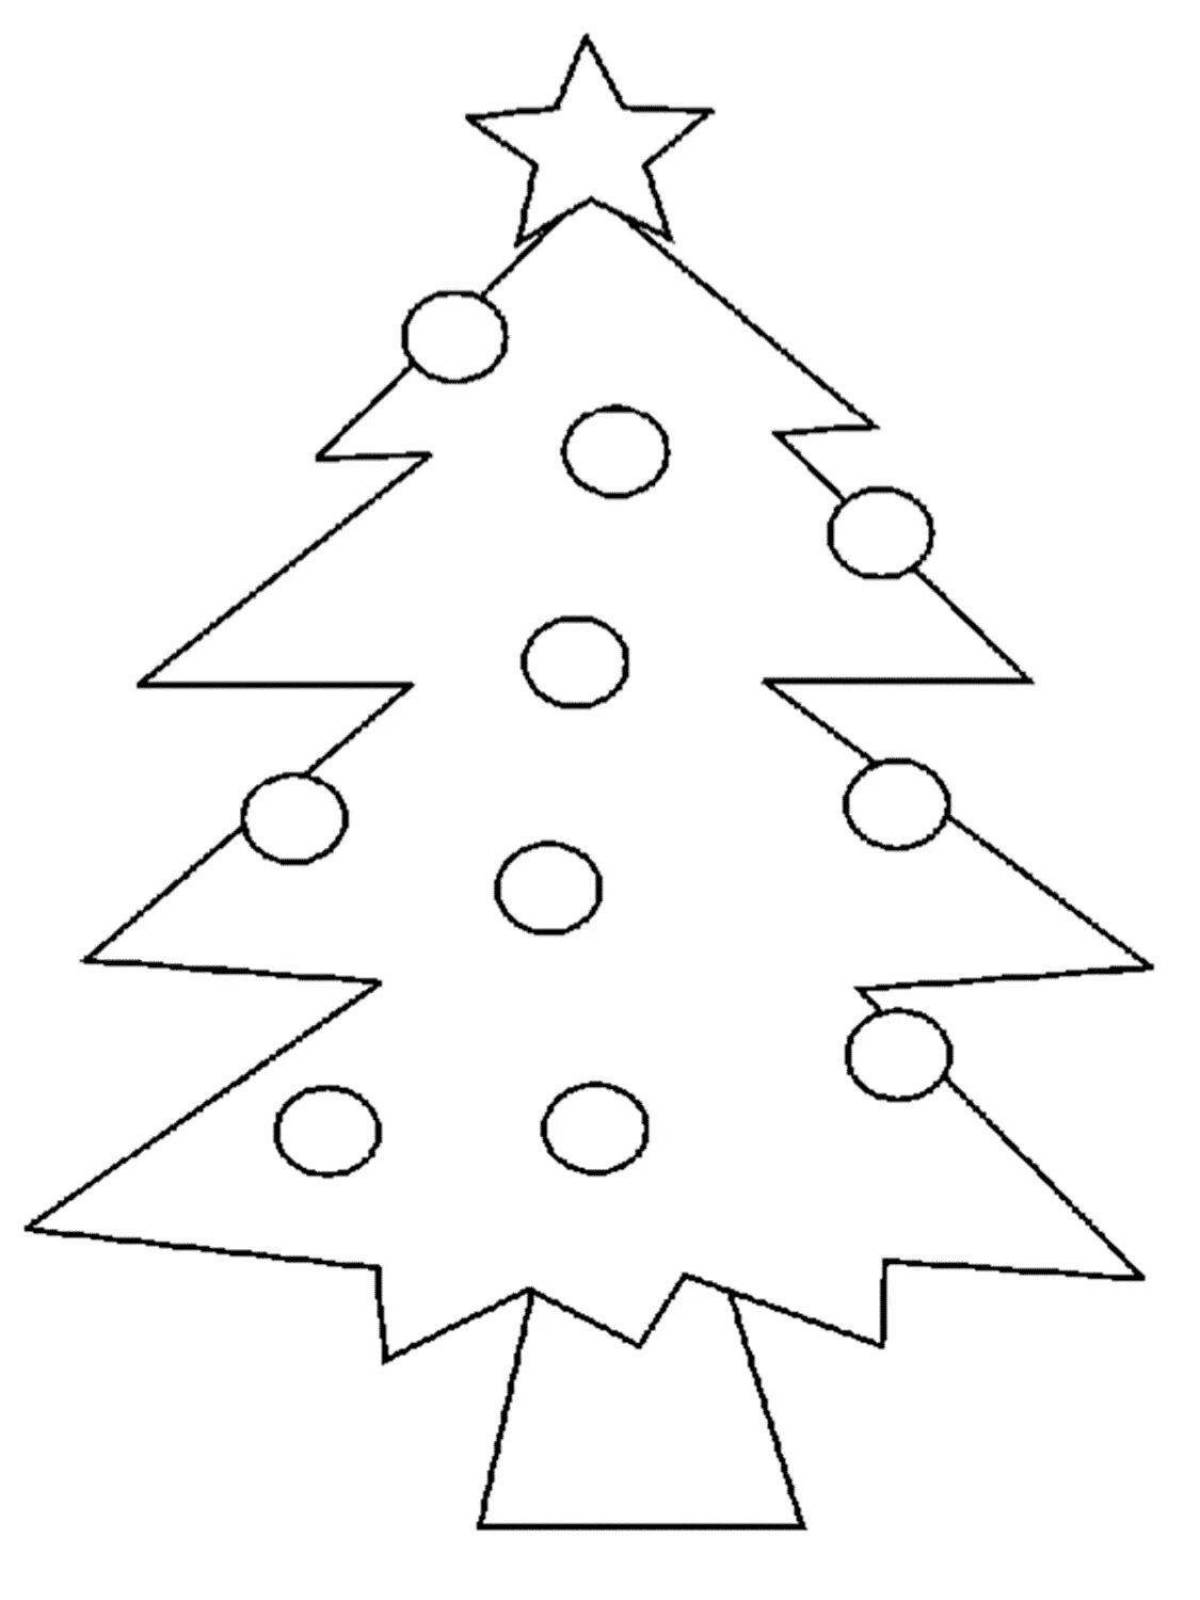 Adorable Christmas tree coloring book with balls